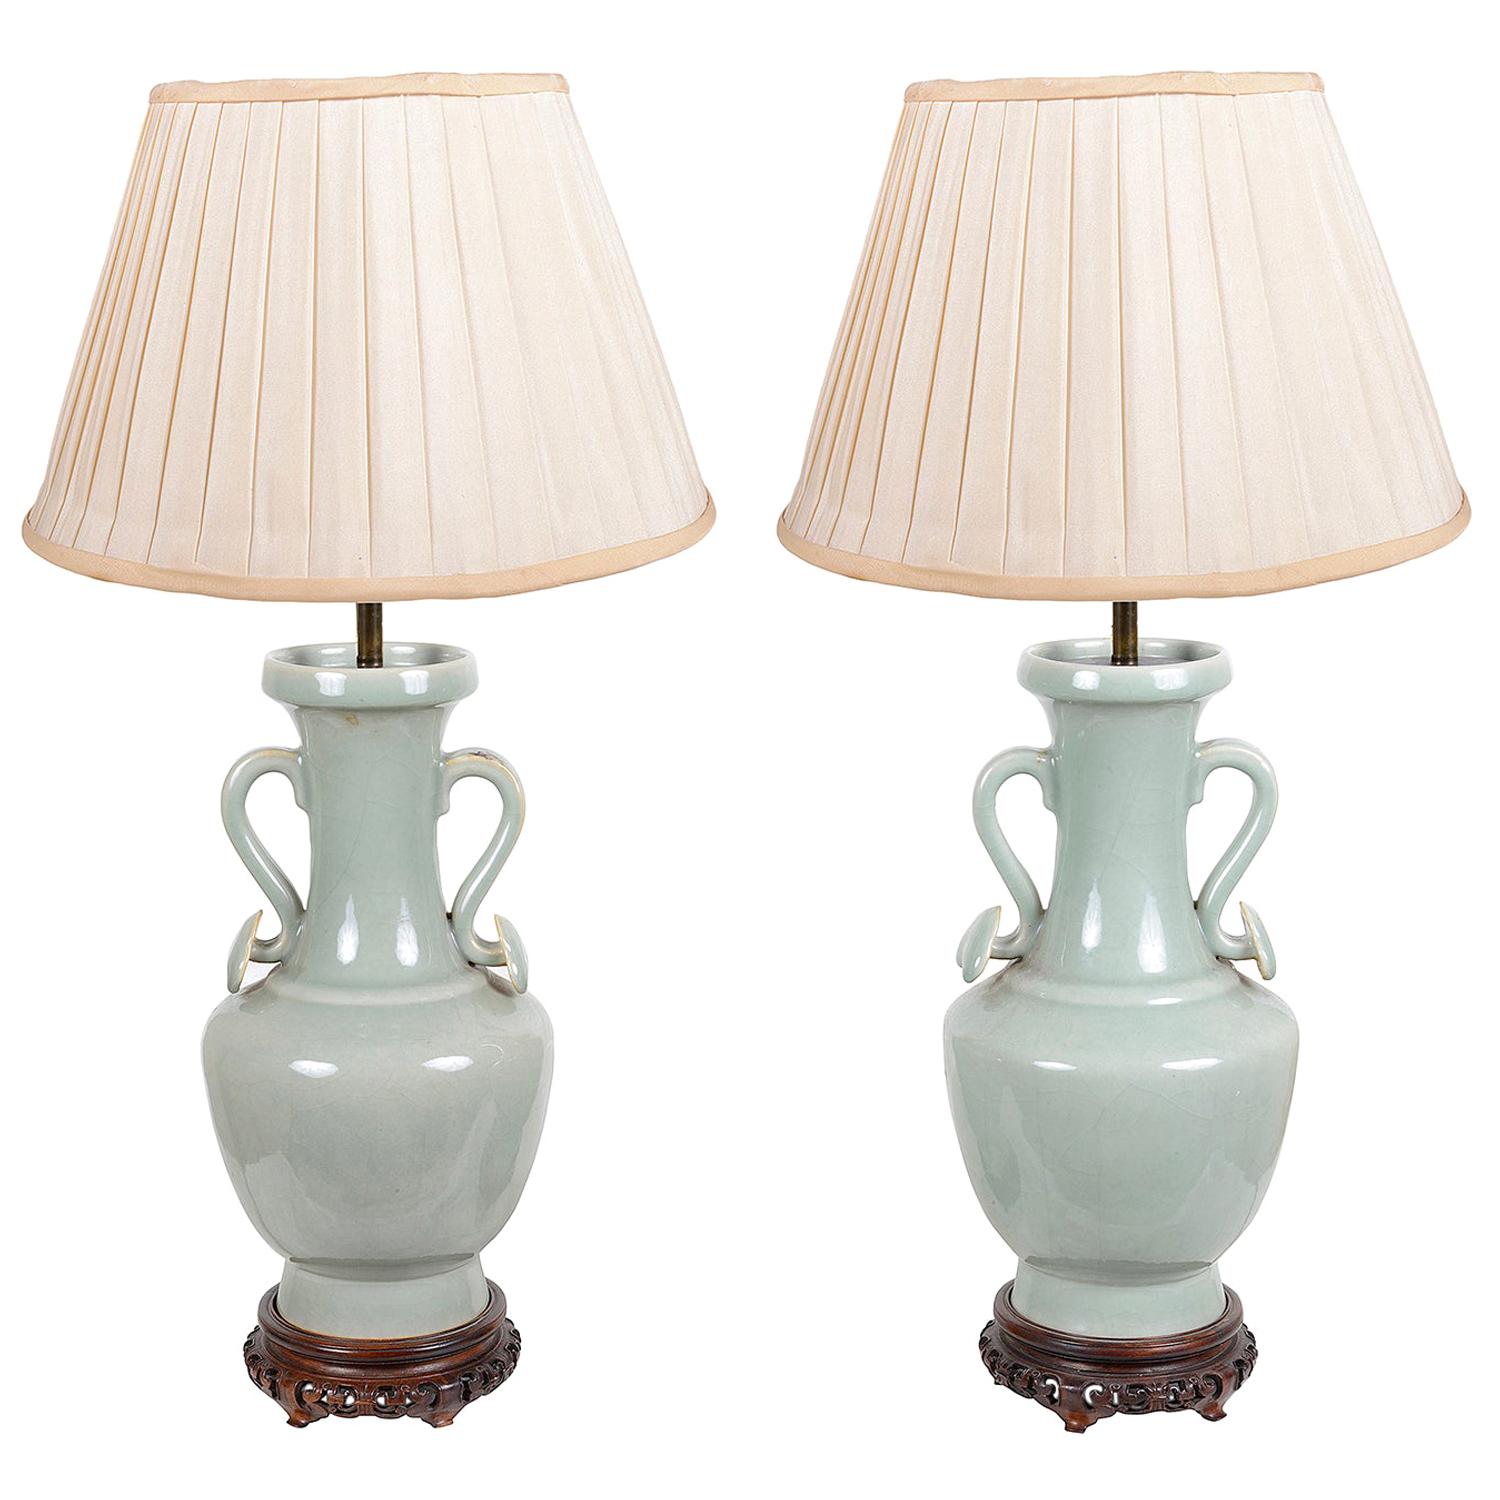 Pair of Chinese Celadon Porcelain Vases / Lamps, circa 1920